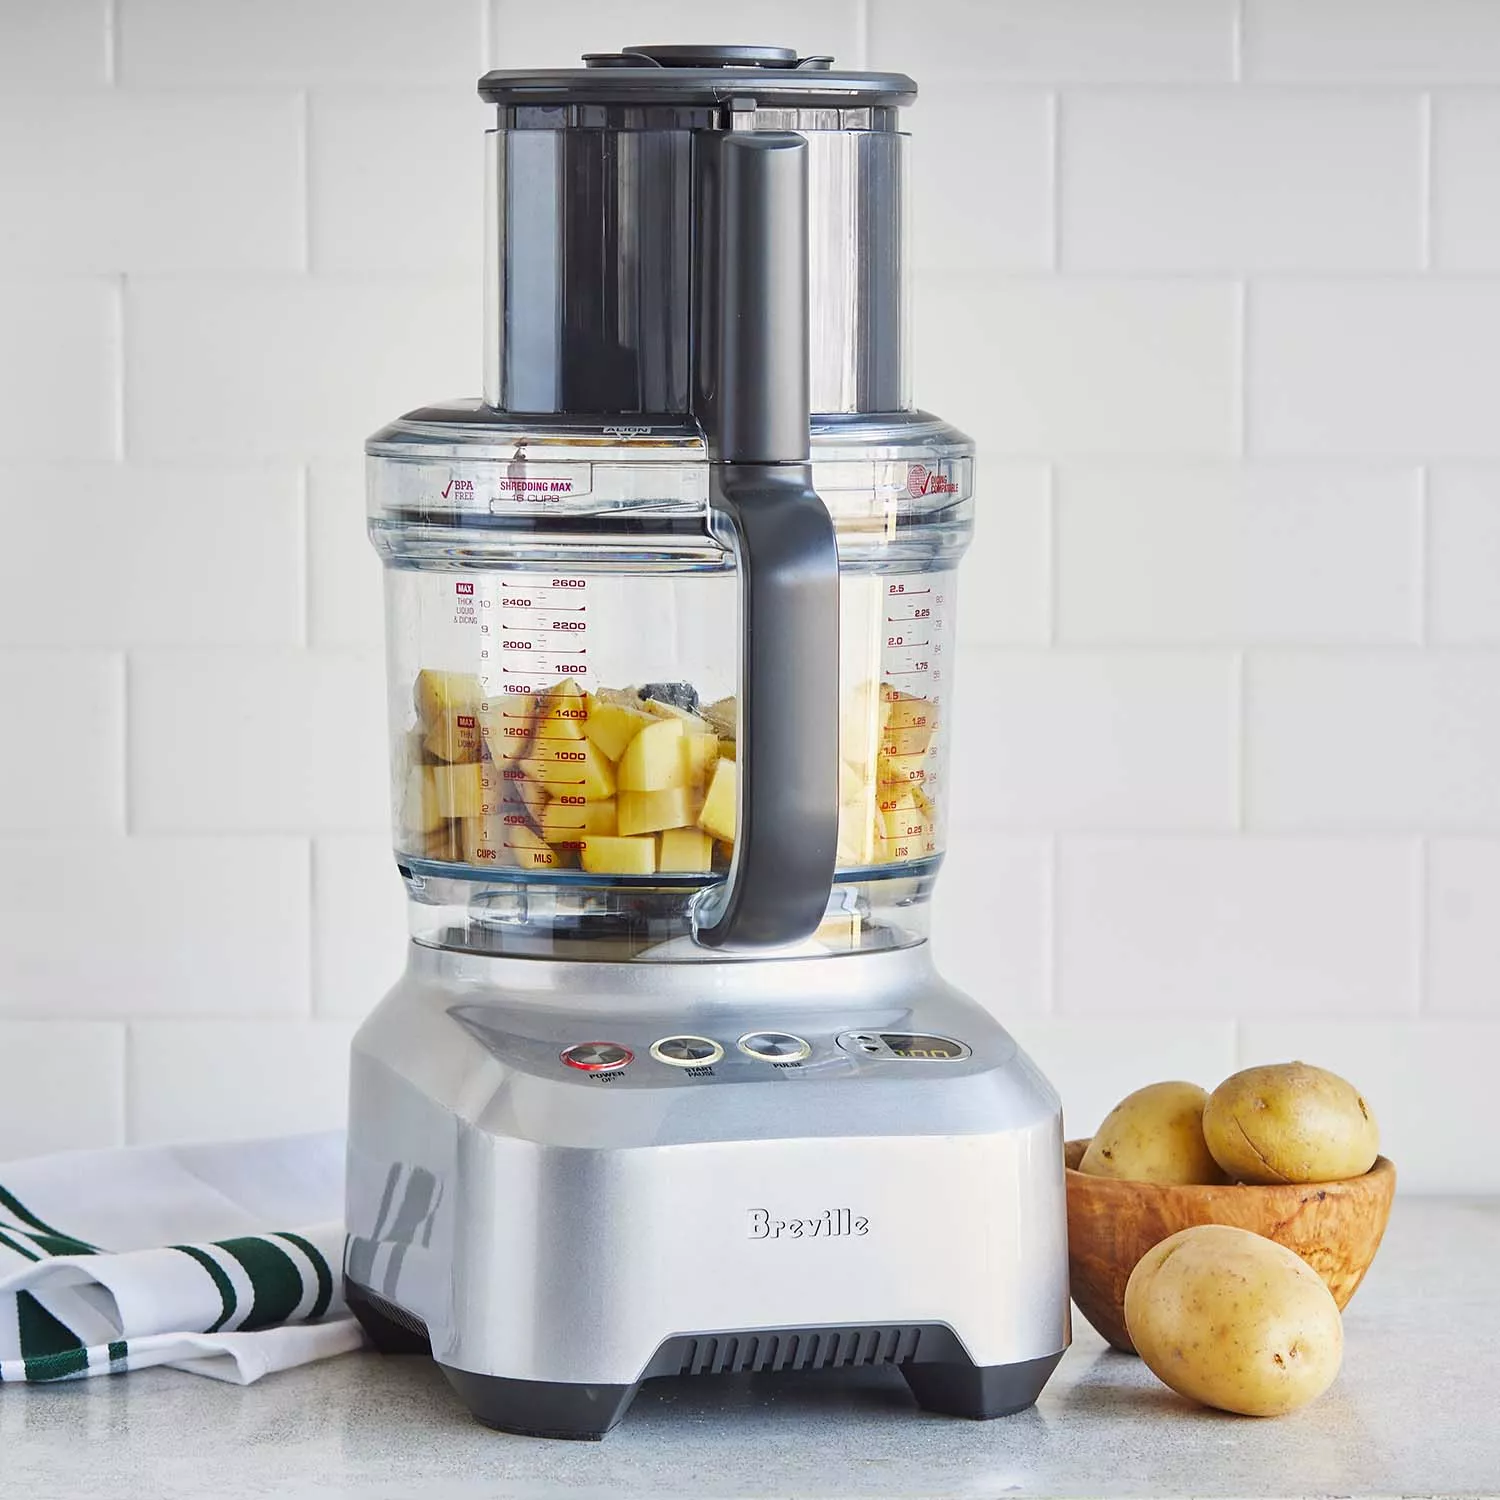 Breville Paradice Brushed Stainless Steel 16-Cup Food Processor +